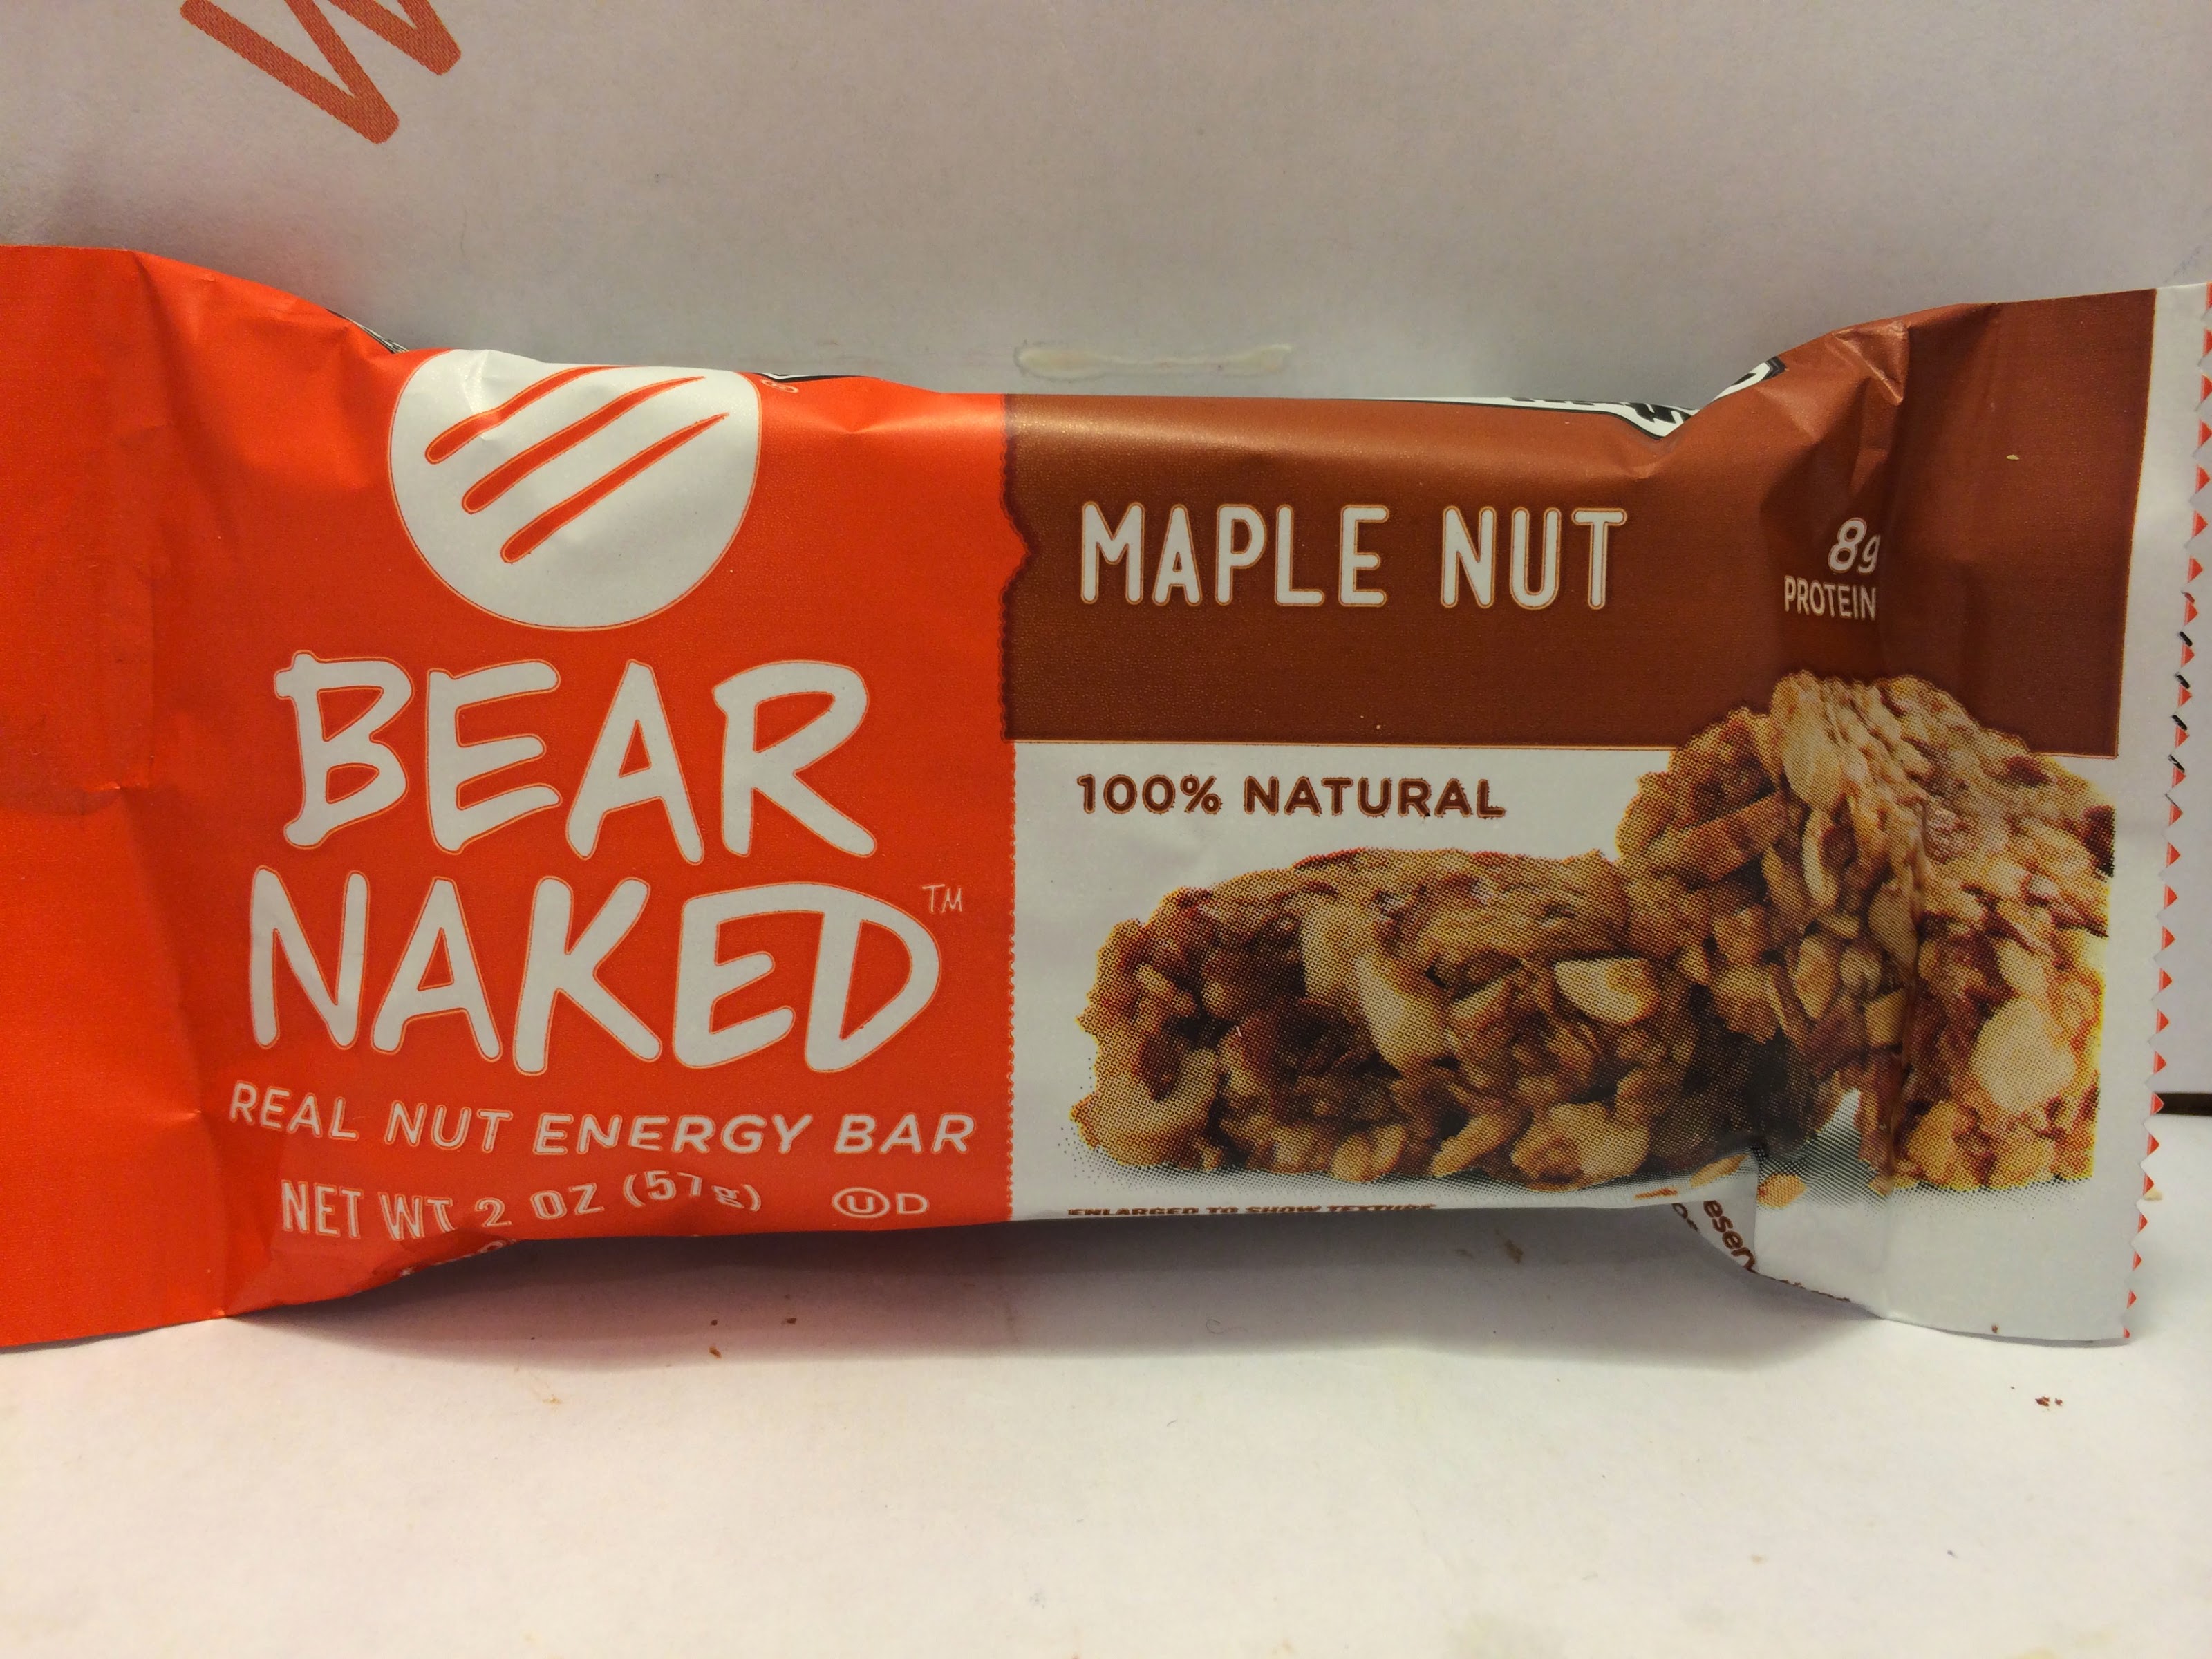 Review: Bear Naked Maple Nut Real Nut Energy Bar.